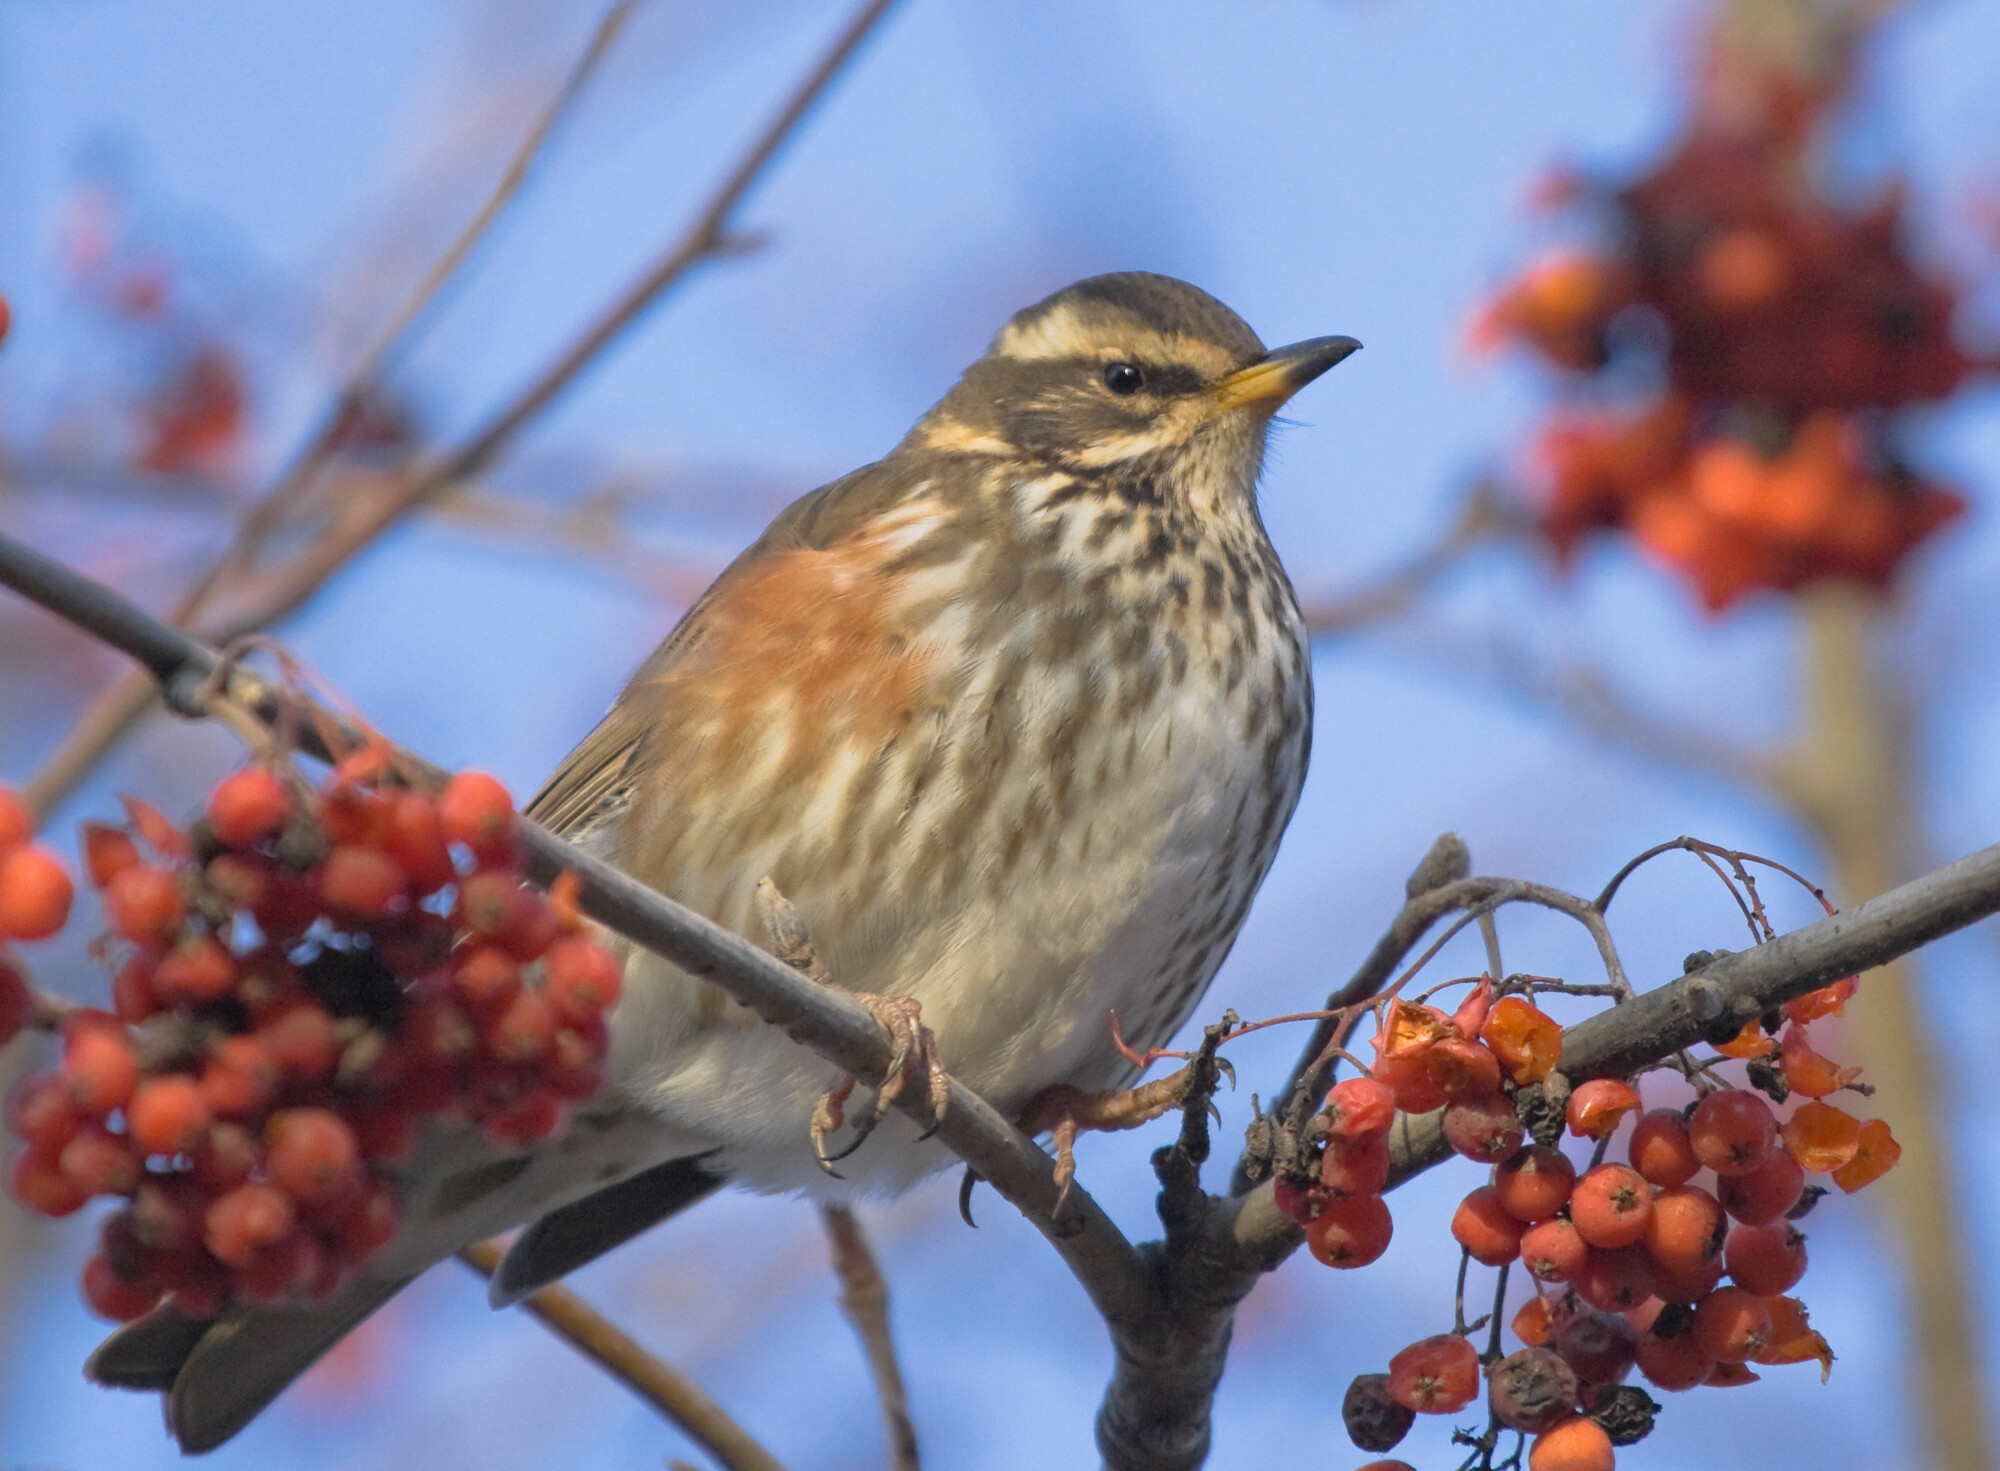 Redwing perched on a branch with clusters of red berries 